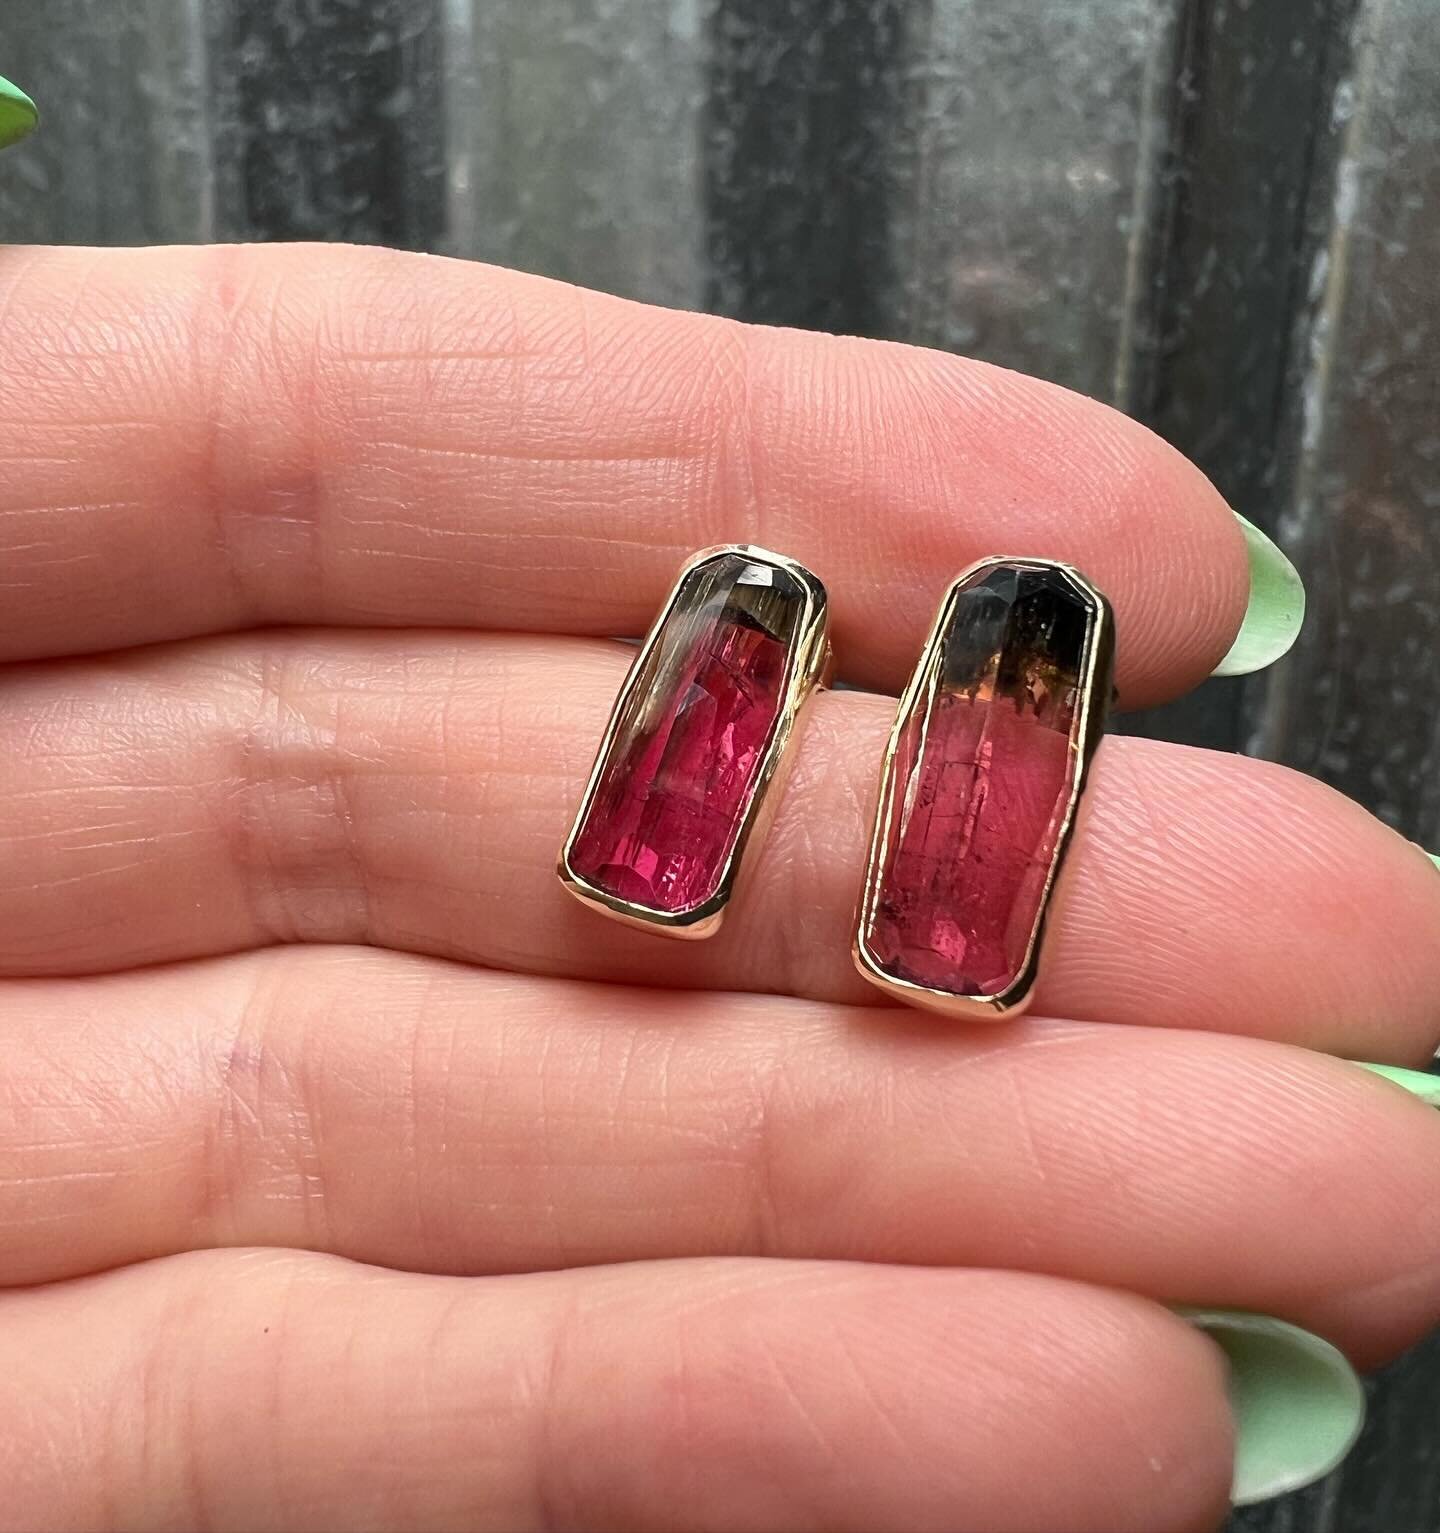 Ava&rsquo;s Custom &ldquo;Jolly Rancher&rdquo; Tourmaline Studs in 14k Yellow Gold

Ava said she loved tourmalines, so she came by the studio to take a look at my collection of gems. 

She quickly picked out this amazing pair of rose cut tourmalines 